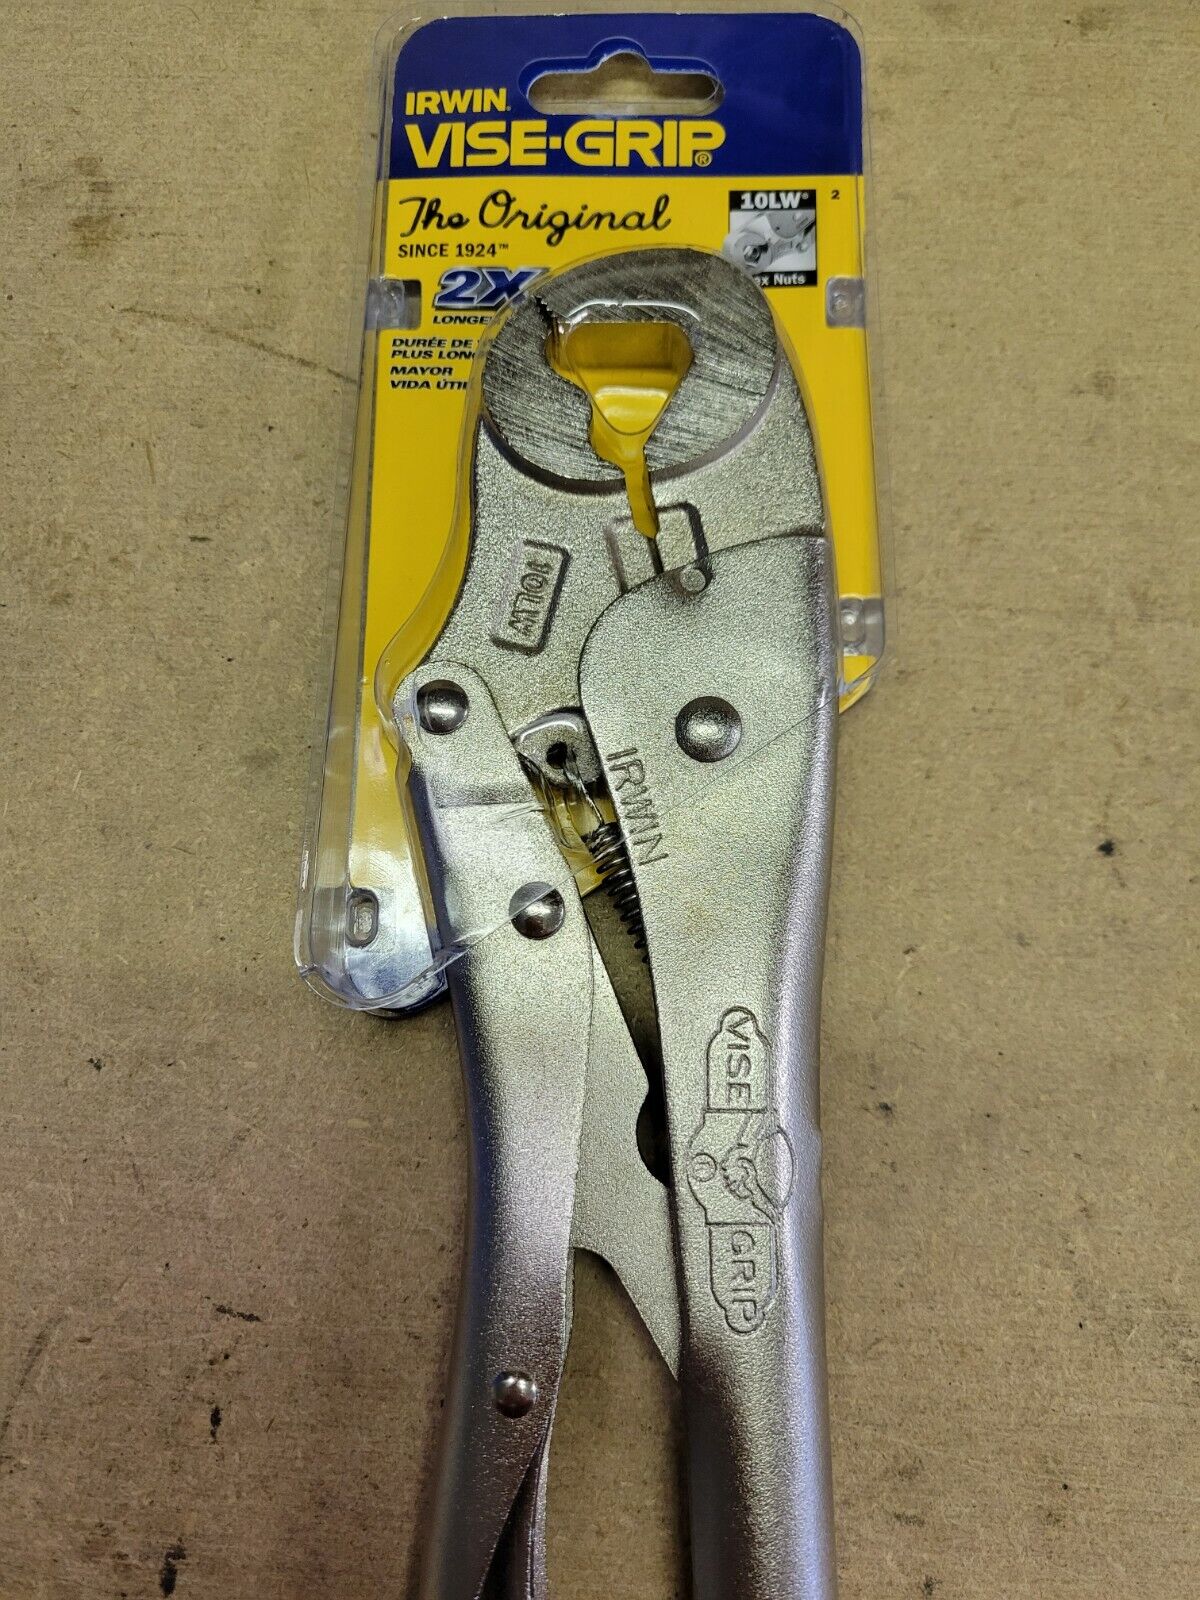 IRWIN VISE GRIP 10LW - 10" LOCKING WRENCH WITH WIRE CUTTER 